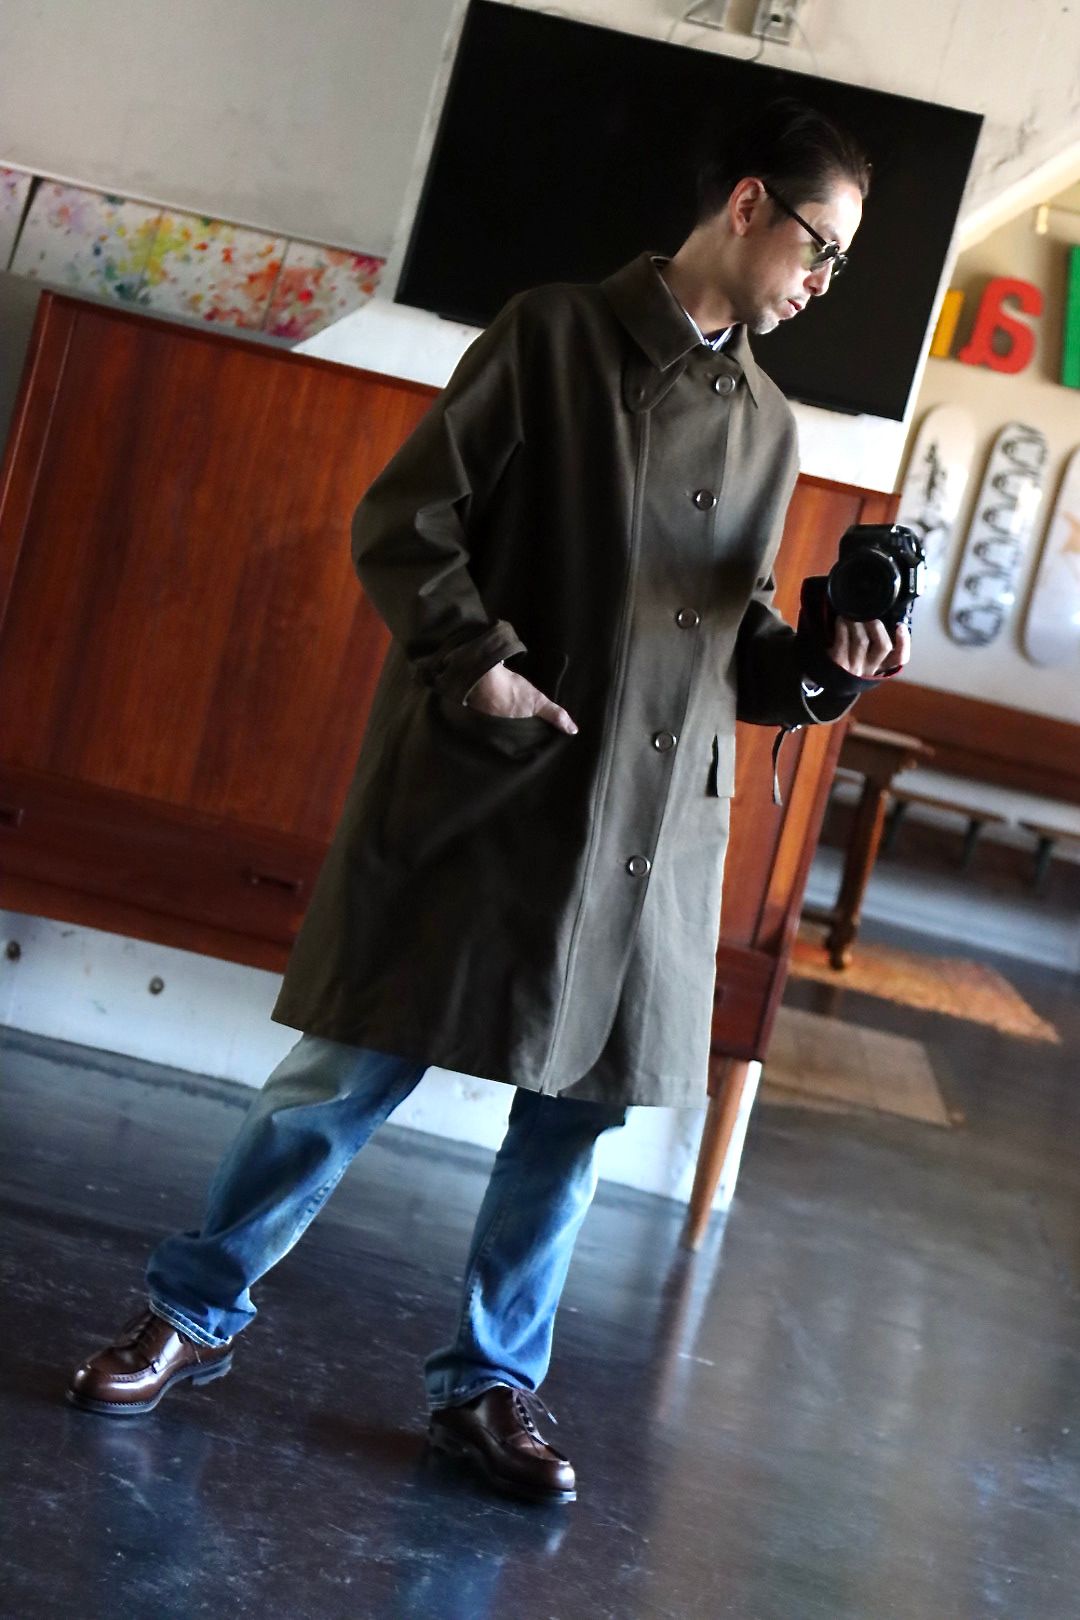 A.PRESSE Motorcycle Half Coat 22aw | www.myglobaltax.com